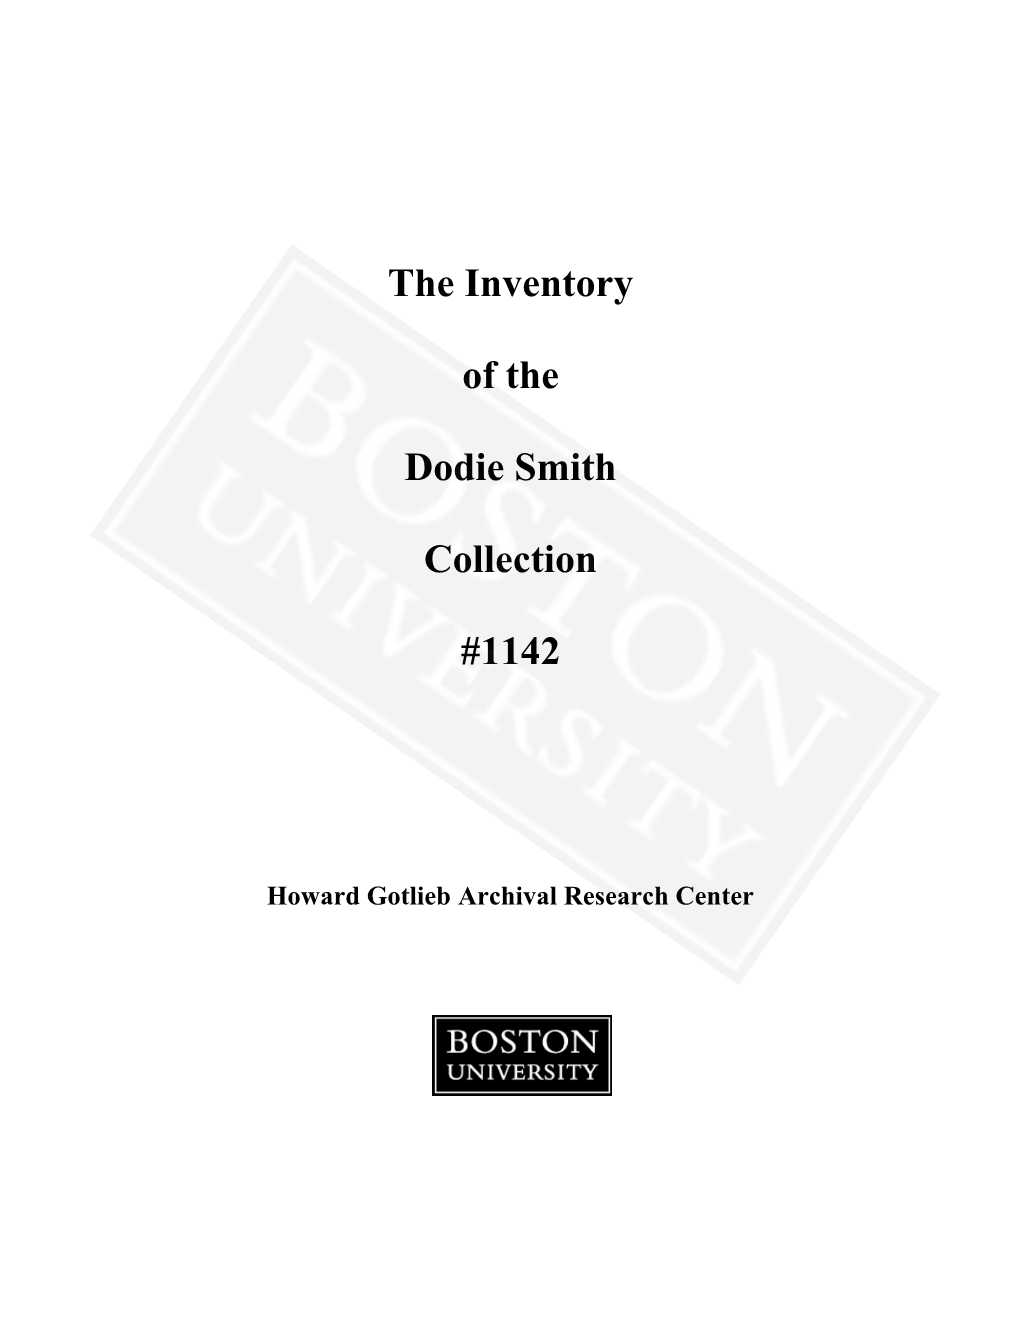 The Inventory of the Dodie Smith Collection #1142